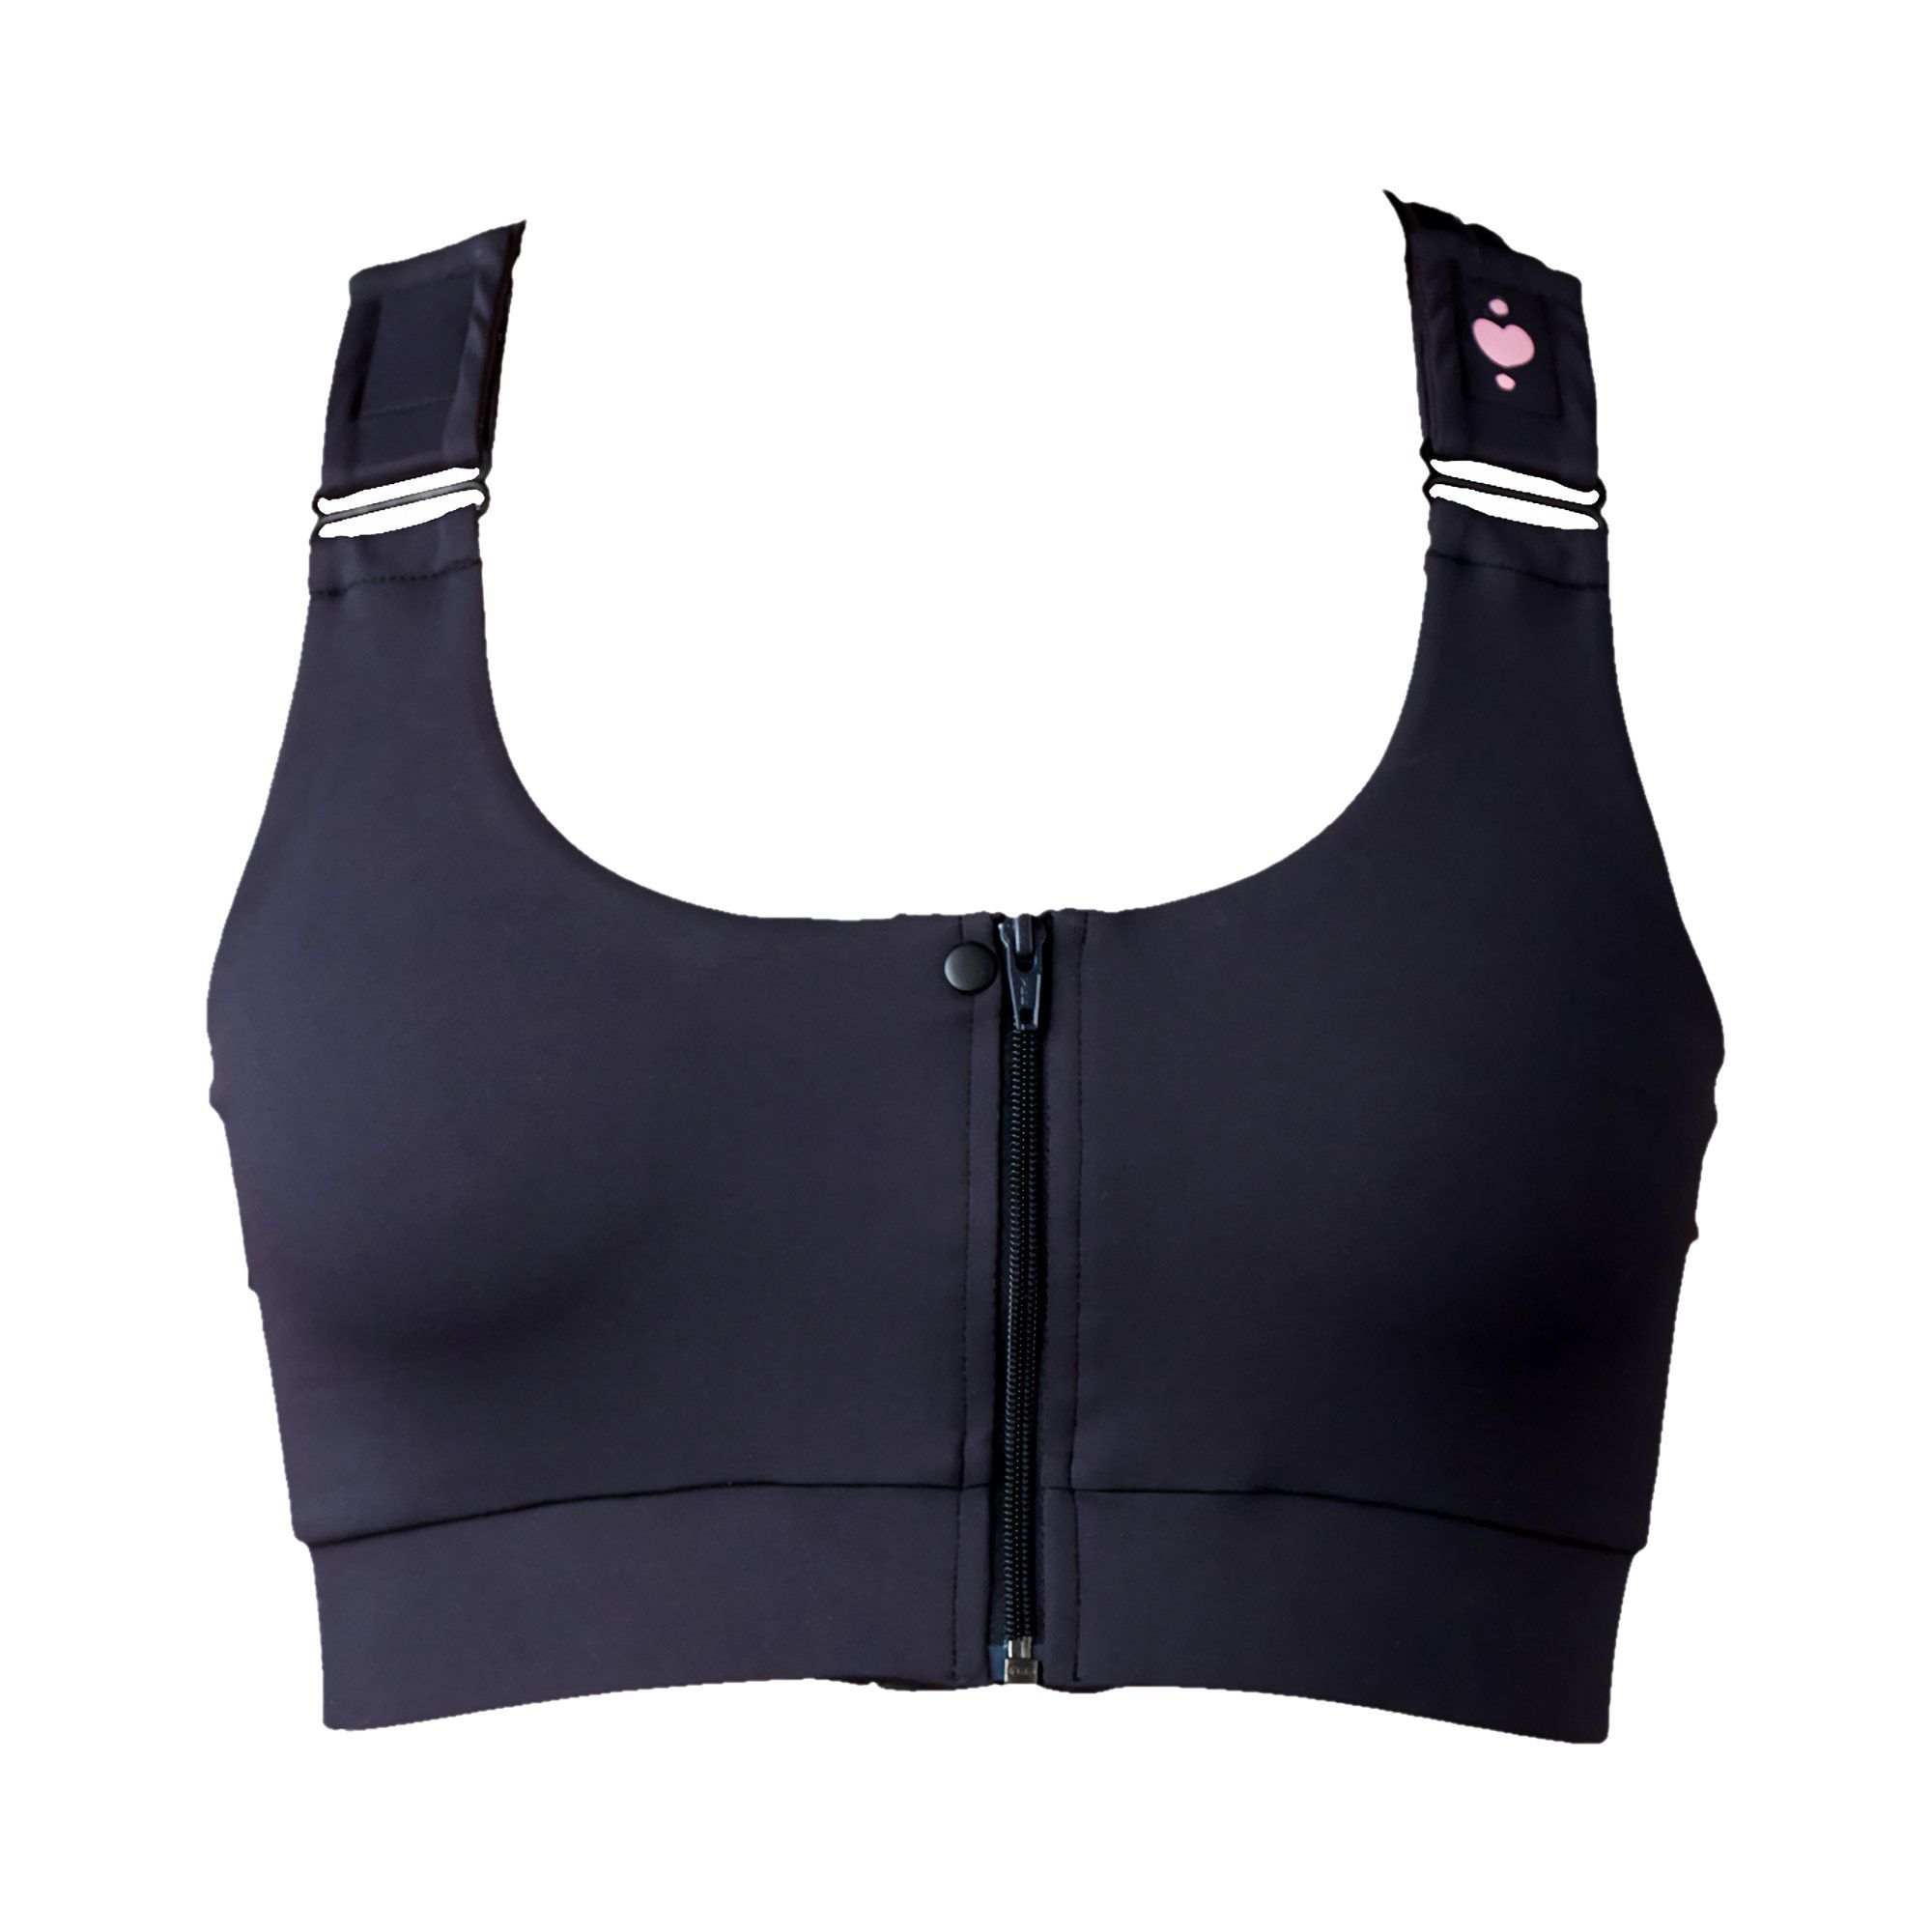 Heart & Core Shirl Post Surgical Bra, Black - Queen Size